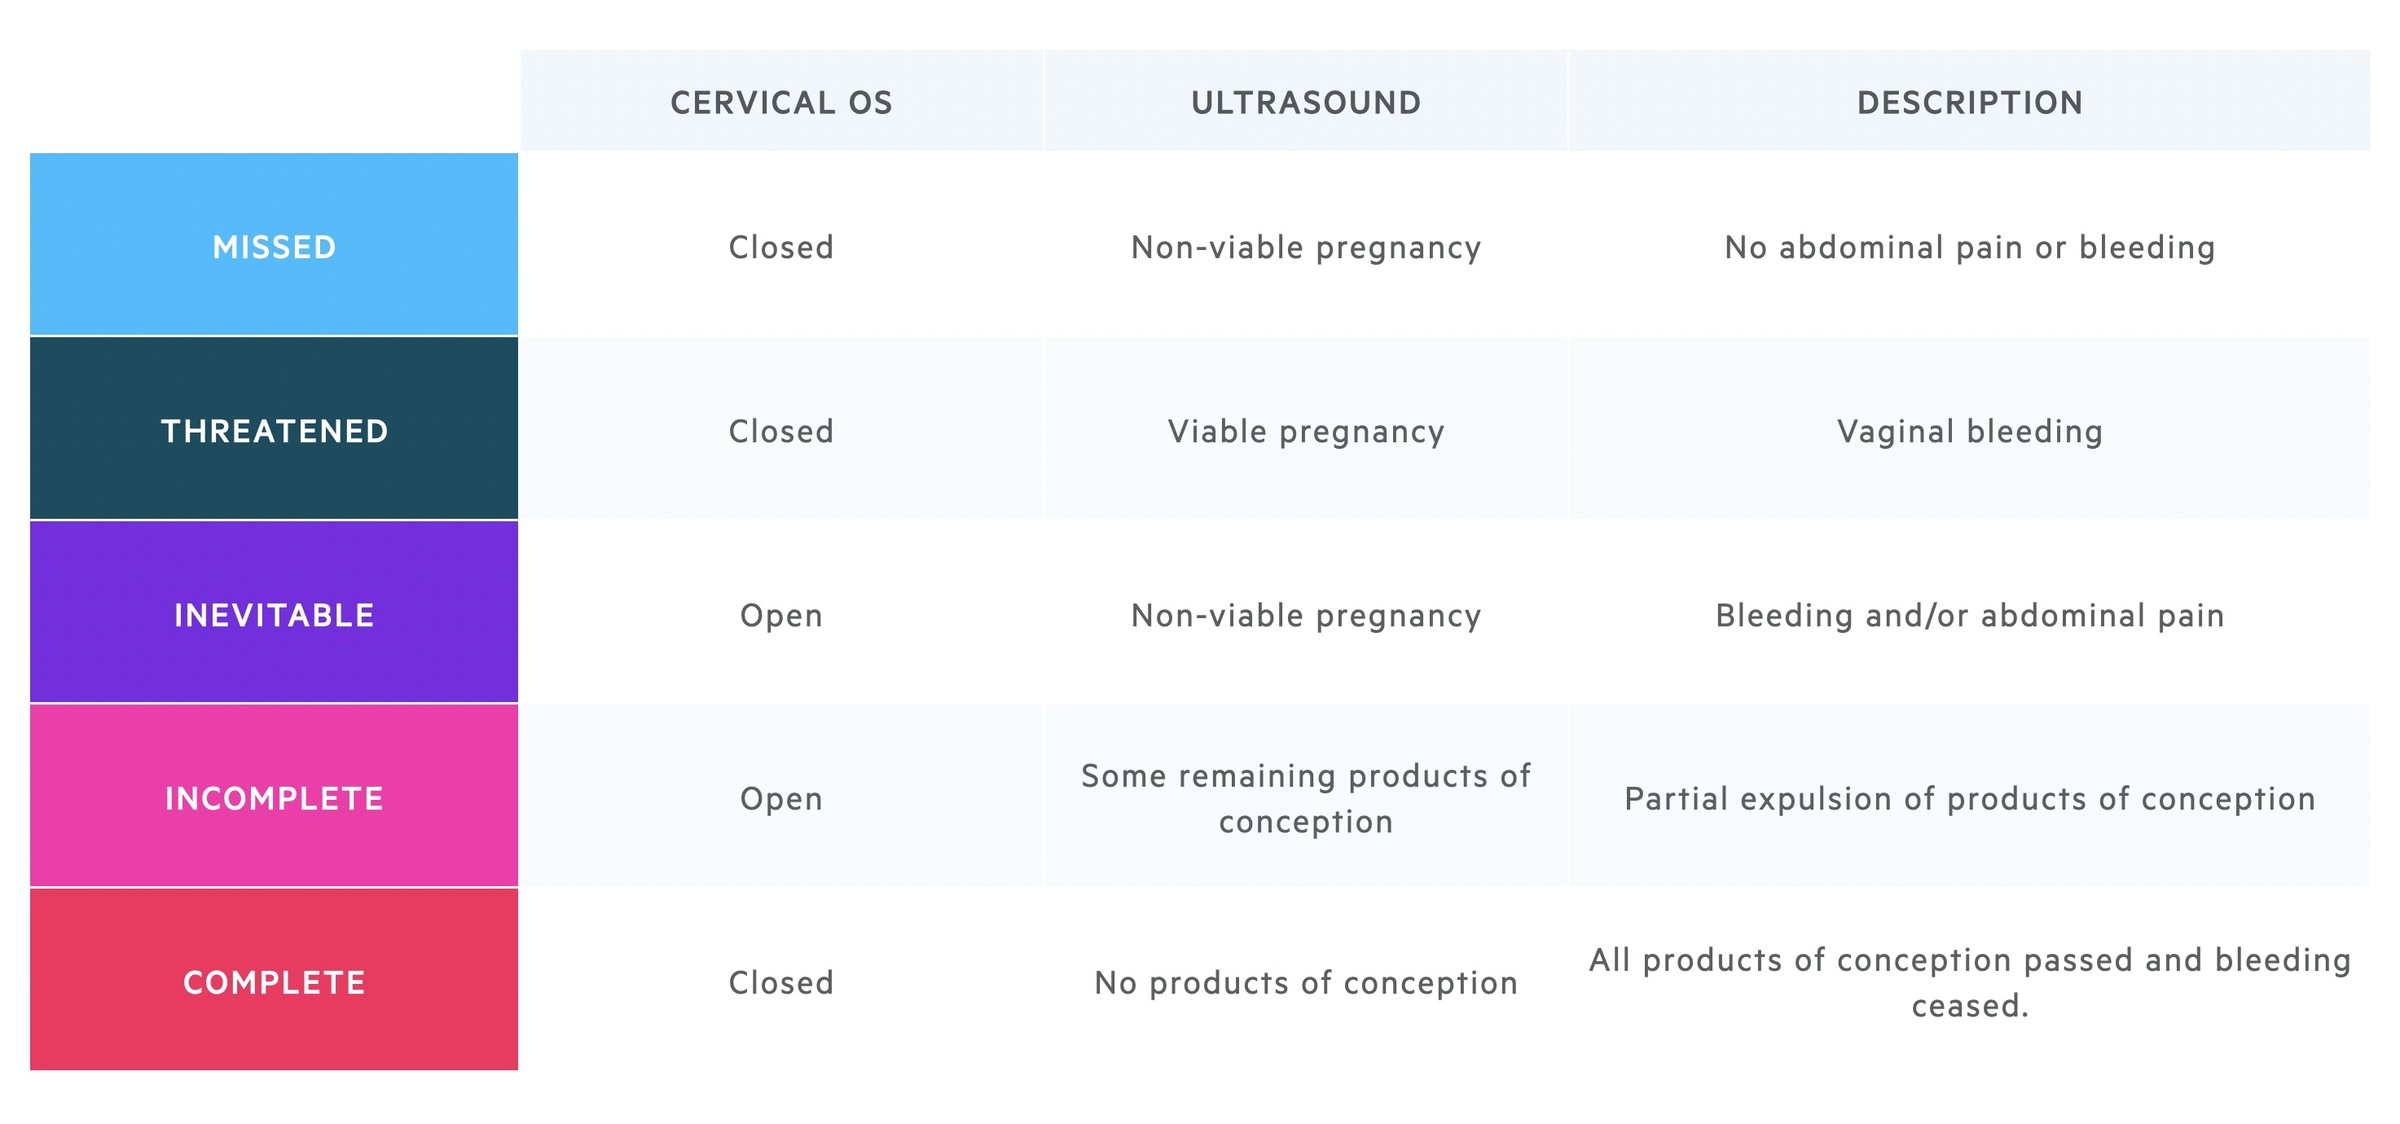 Classification of miscarriage (missed, threatened, inevitable, incomplete, complete)